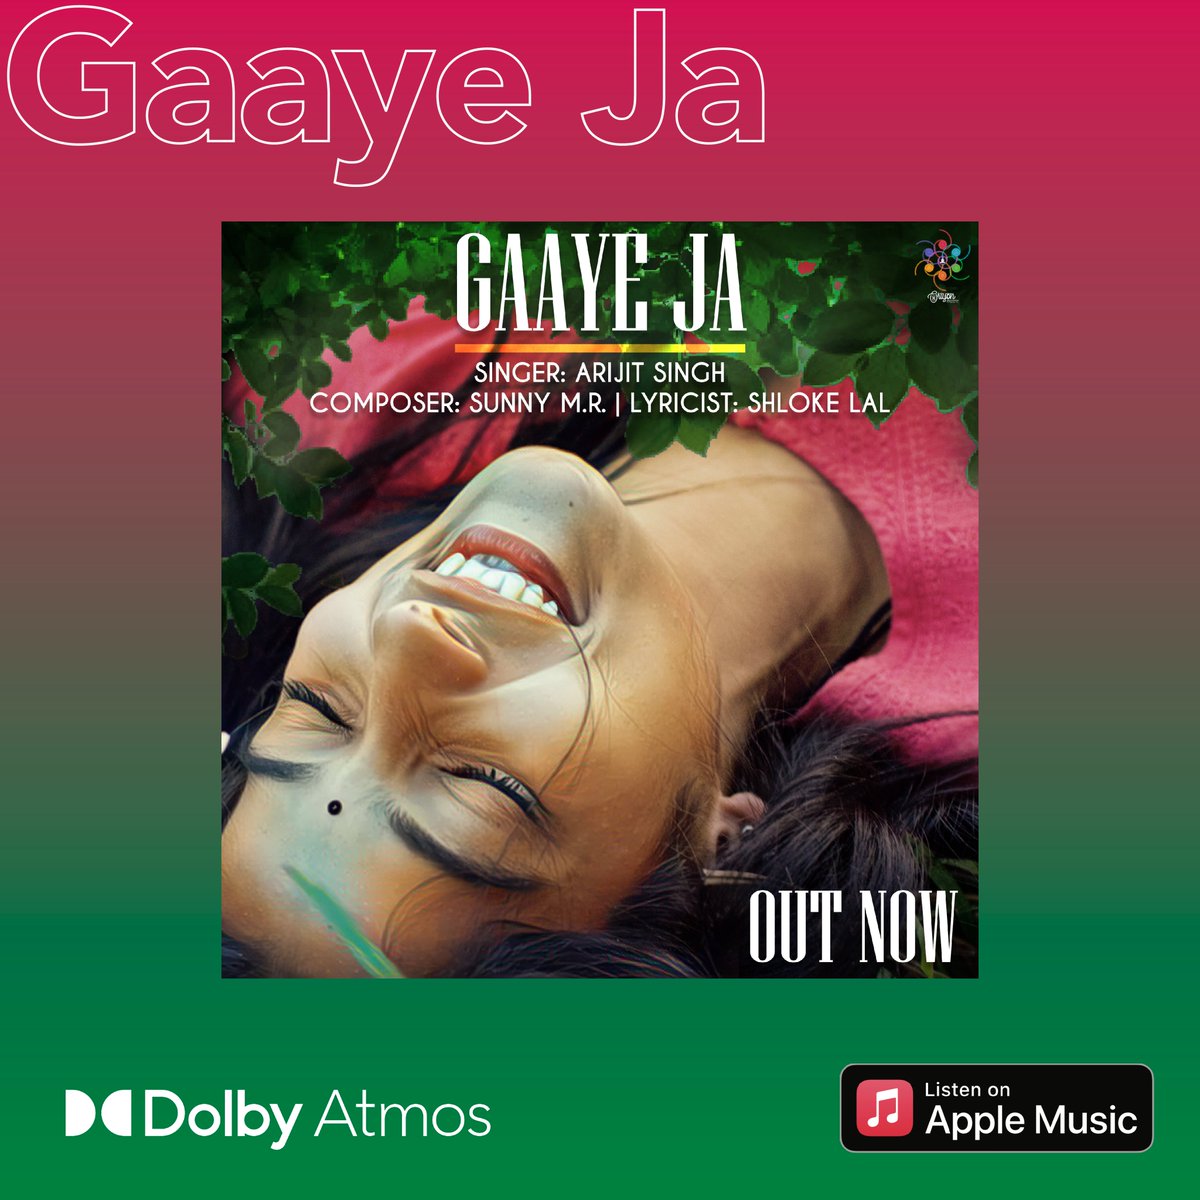 Lose yourself with the voice of Arjit Singh. Listen to Gaaye Ja in the immersive sound of #DolbyAtmos on @AppleMusic @SunnyMROfficial #ChordFatherProductions